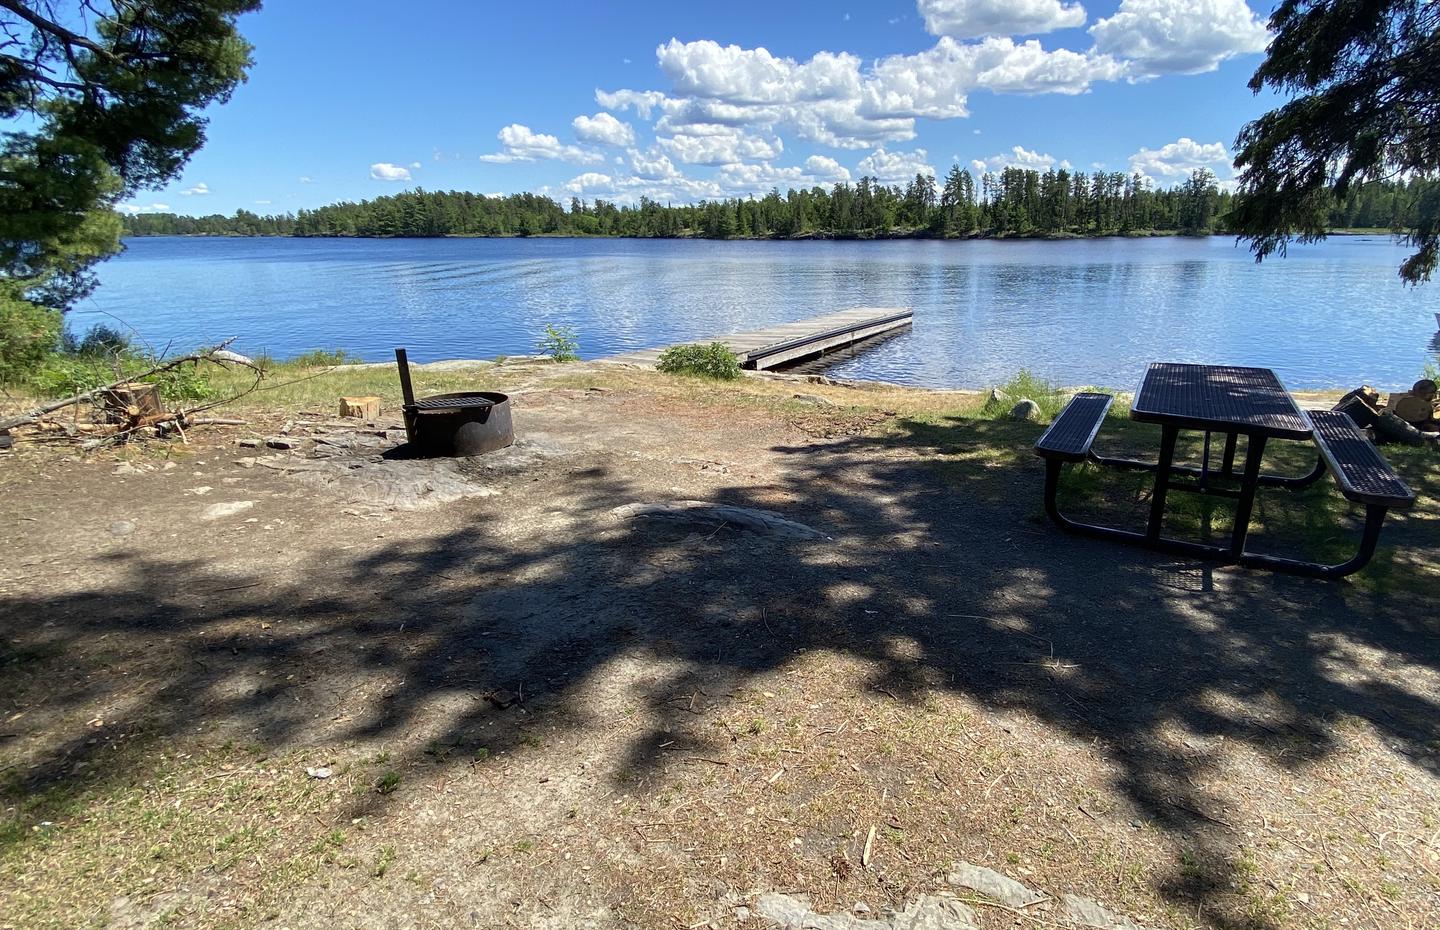 R74 - Rainy Lake Group, view looking out from campsite of a fire ring and picnic table with one of the boat docks in the background of water.View looking out from campsite.